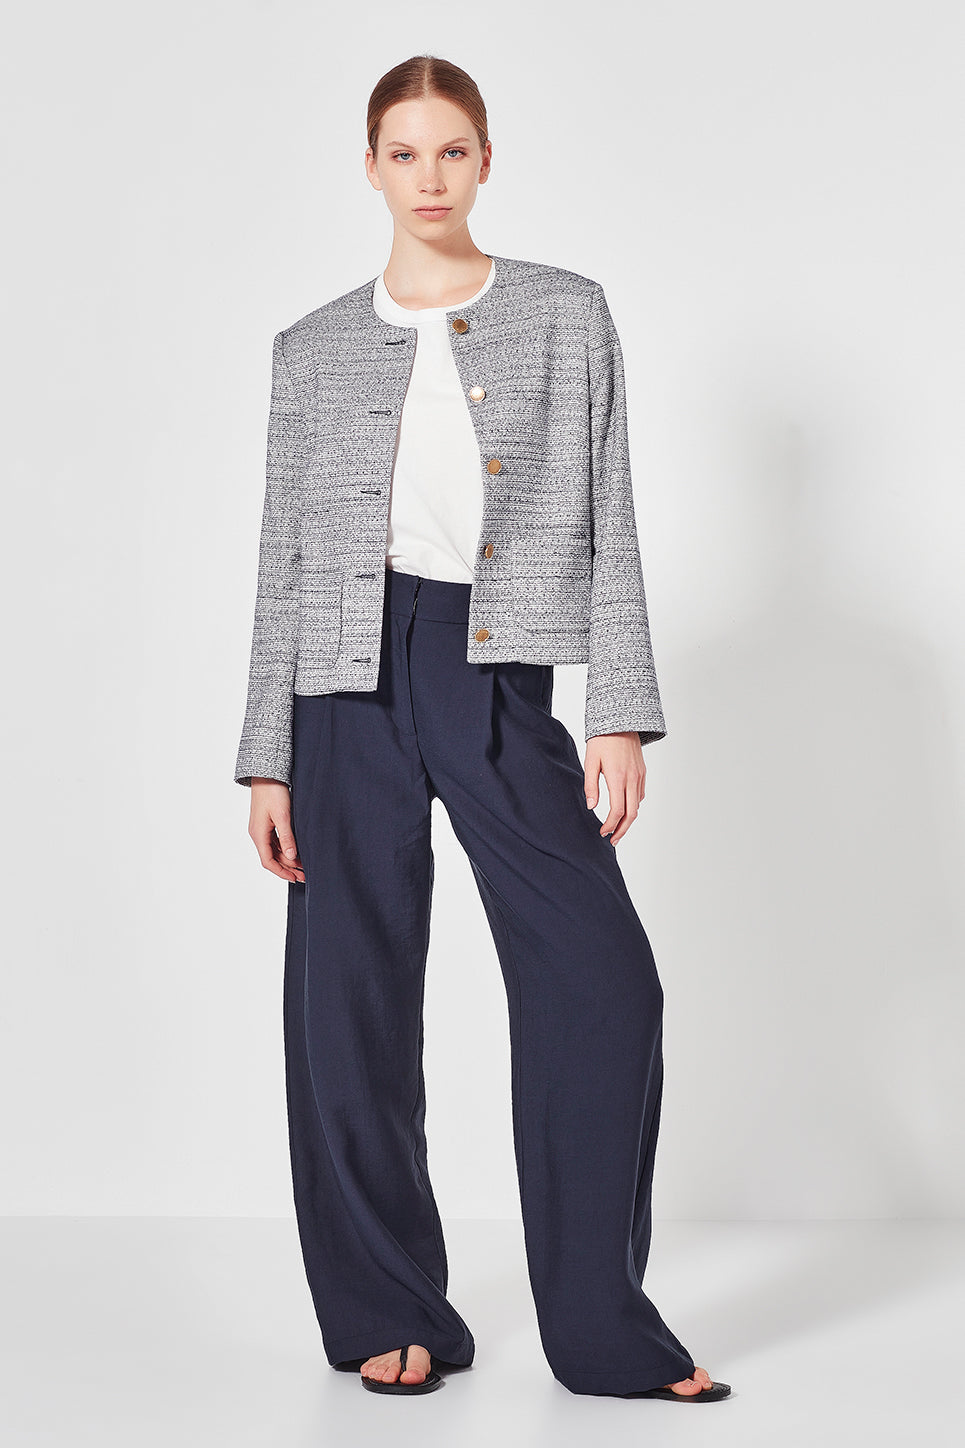 The Selbourne Trouser in Navy